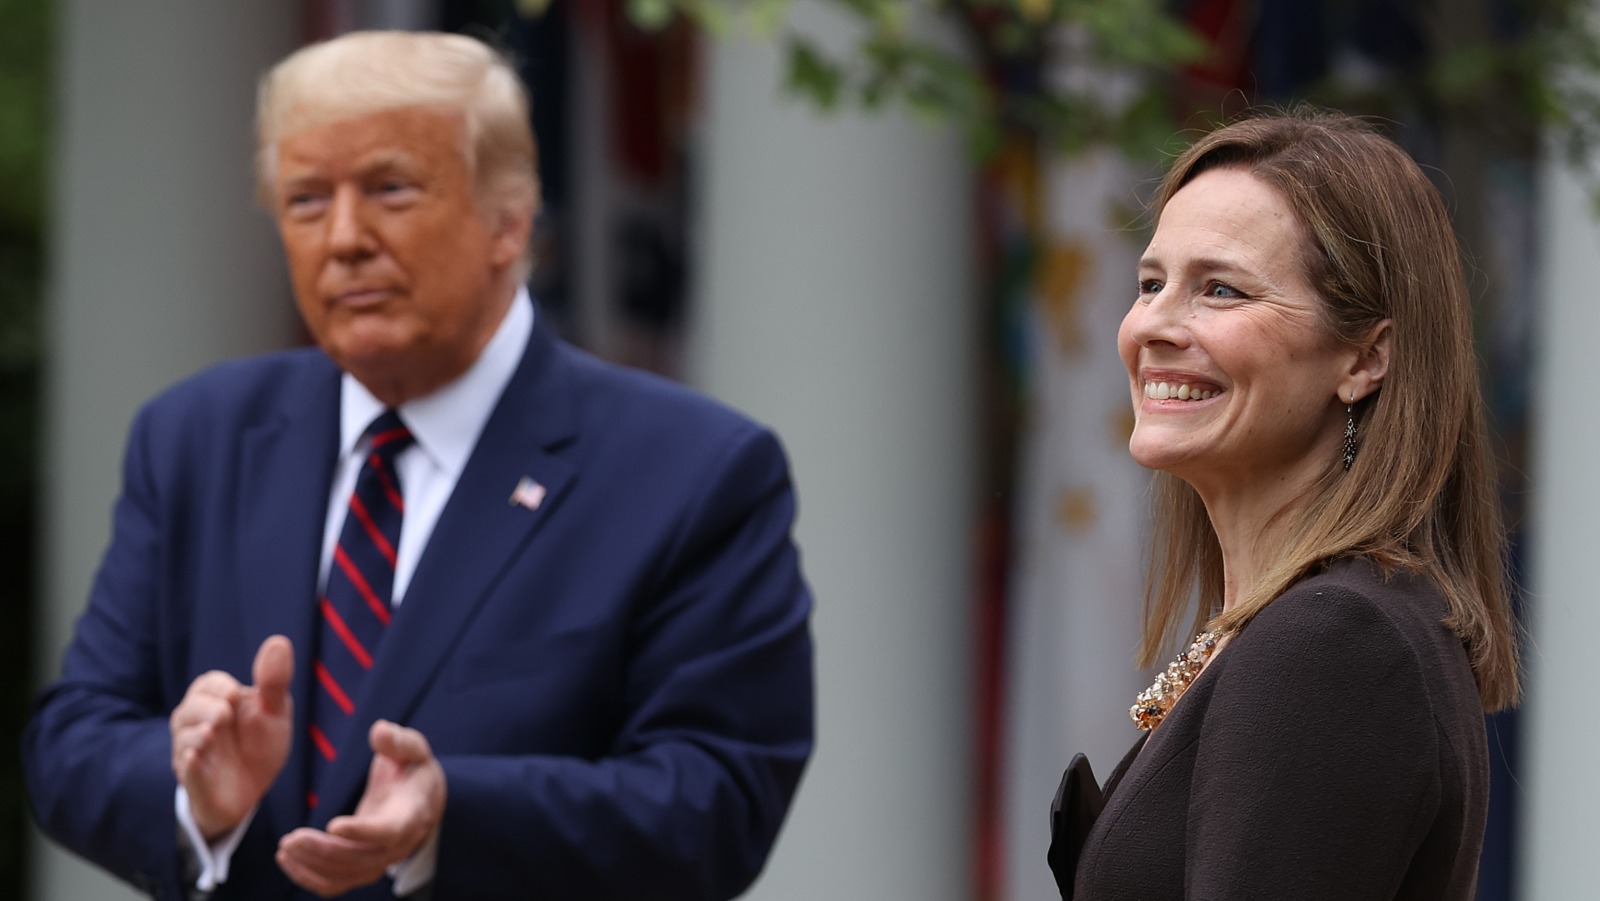 Why Everyone Is Talking About Amy Coney Barrett's Judicial Record